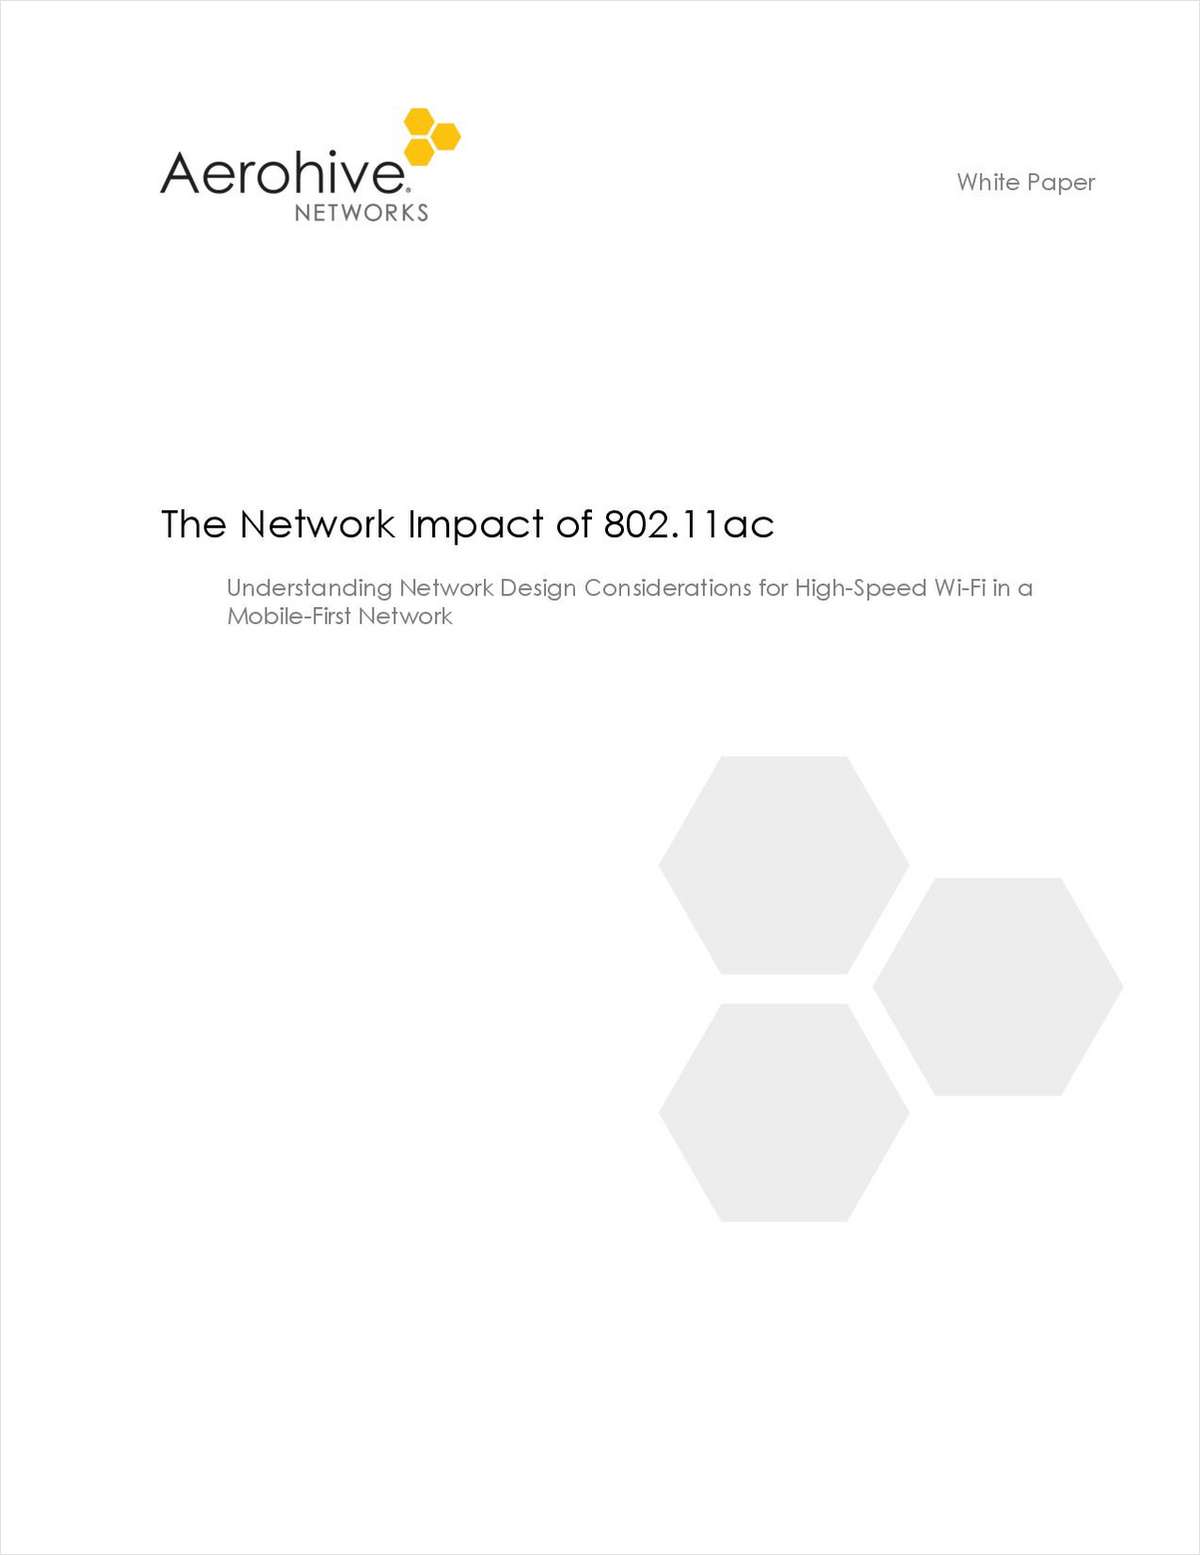 The Network Impact of 802.11ac